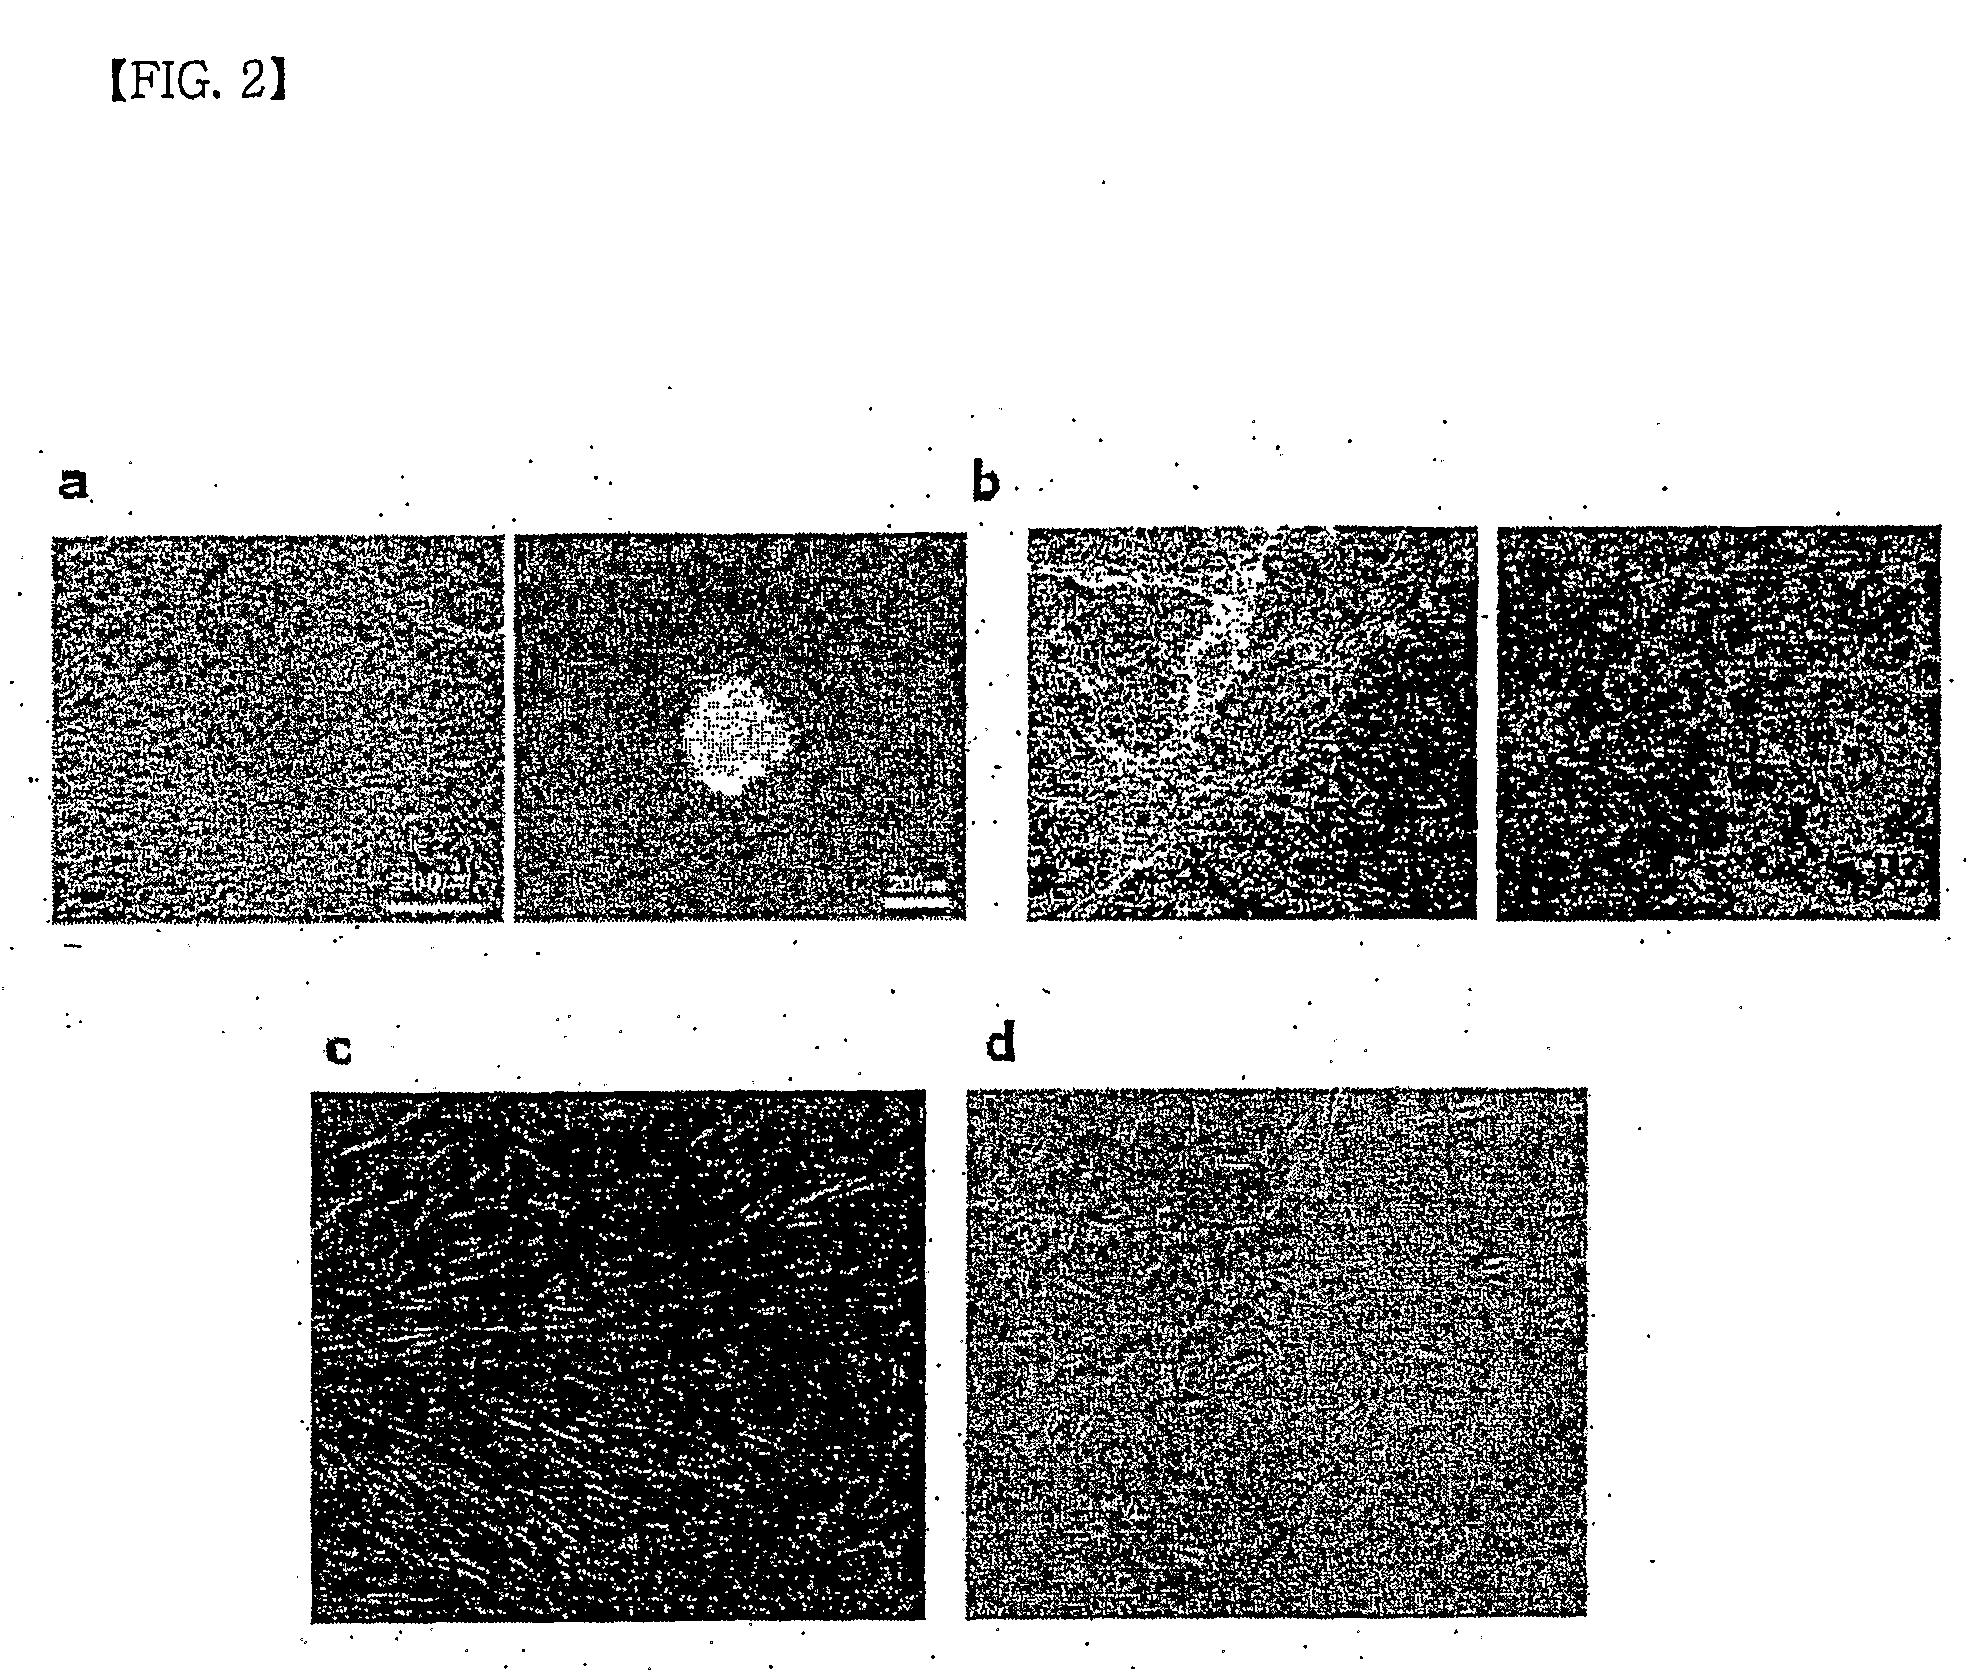 Method for producing mesenchymal stem cells from human pluripotent stem cells, and mesenchymal stem cells produced by same